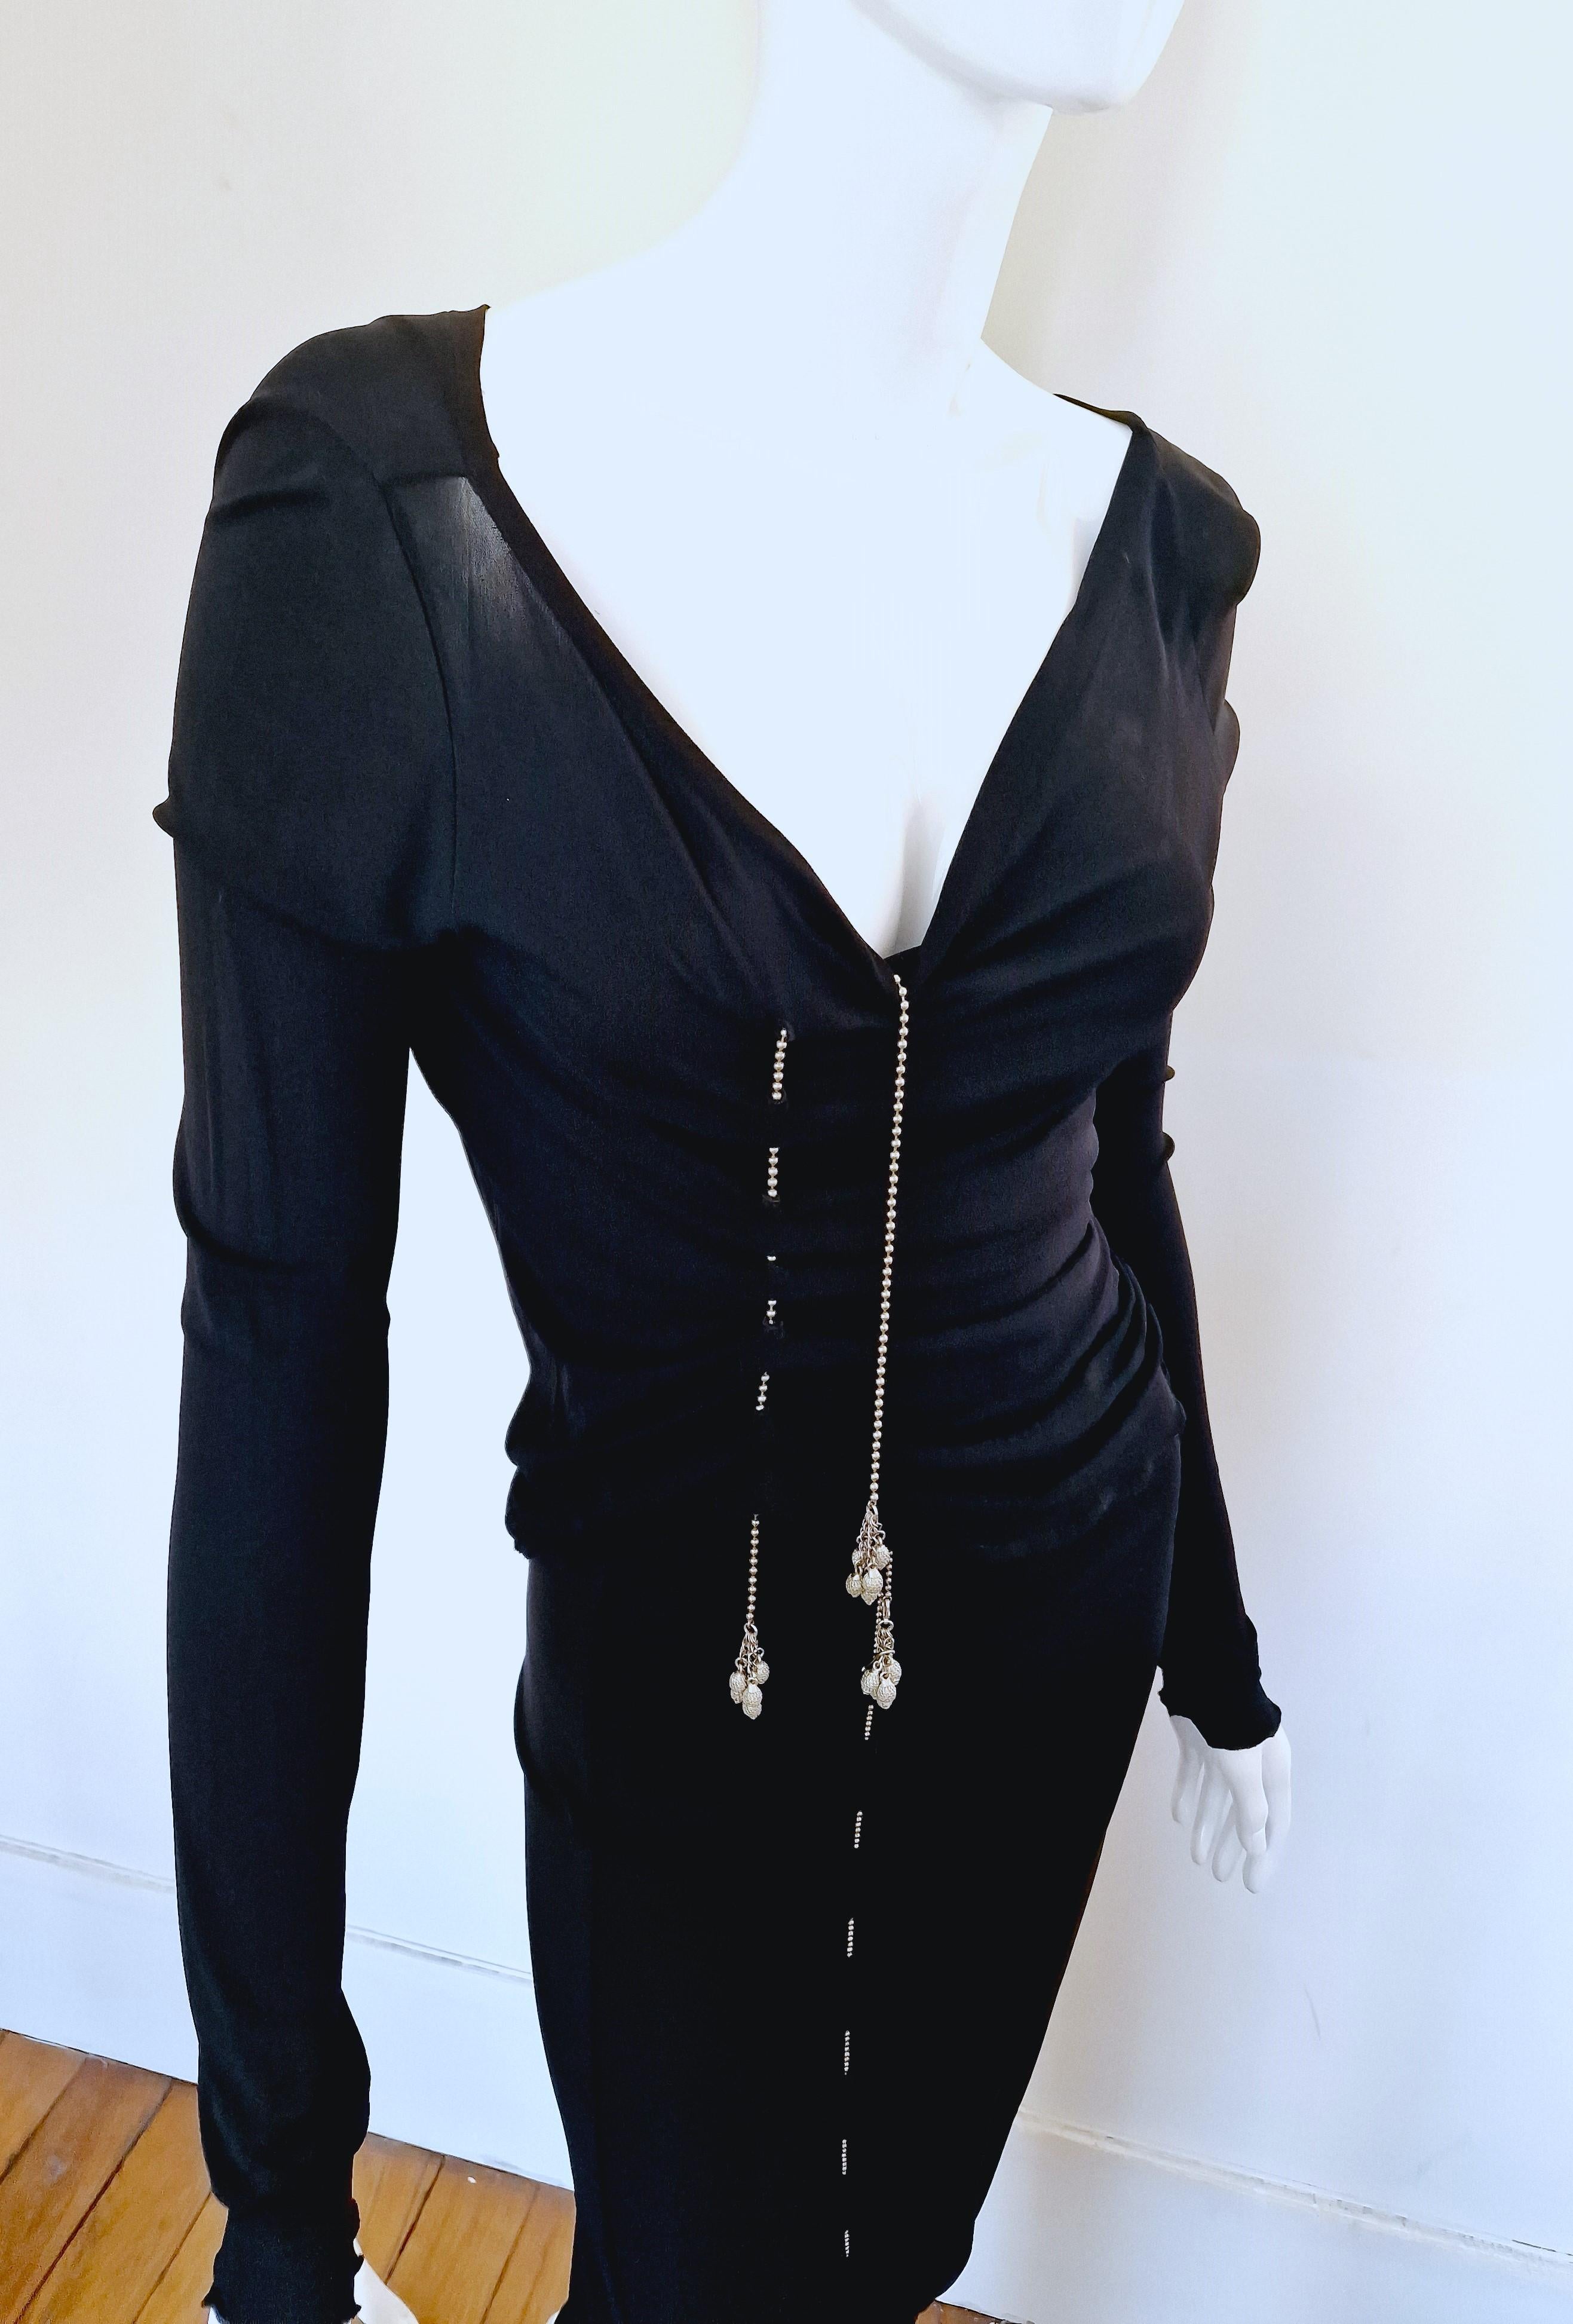 Jean Paul Gaultier Silver Chain Lace Up Black Semi Sheer Vintage Large Dress For Sale 3